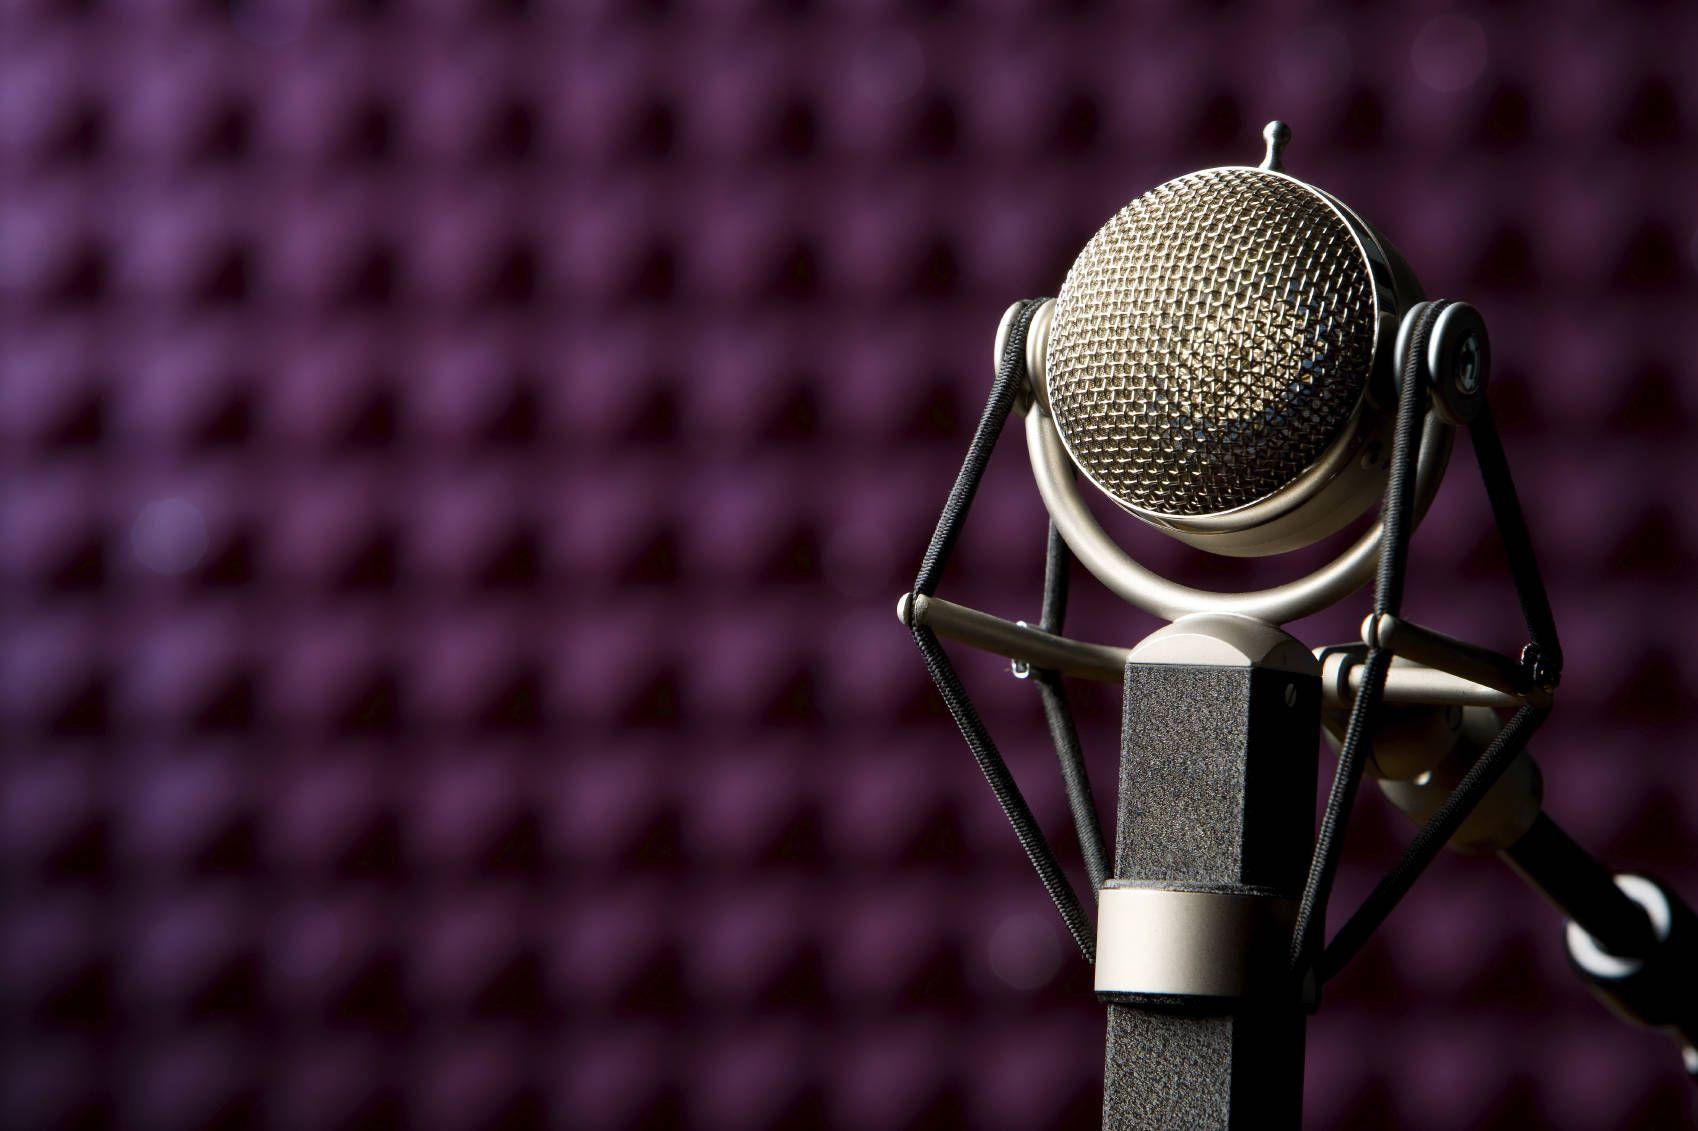 XW 317: Microphone Wallpaper, Picture Of Microphone High